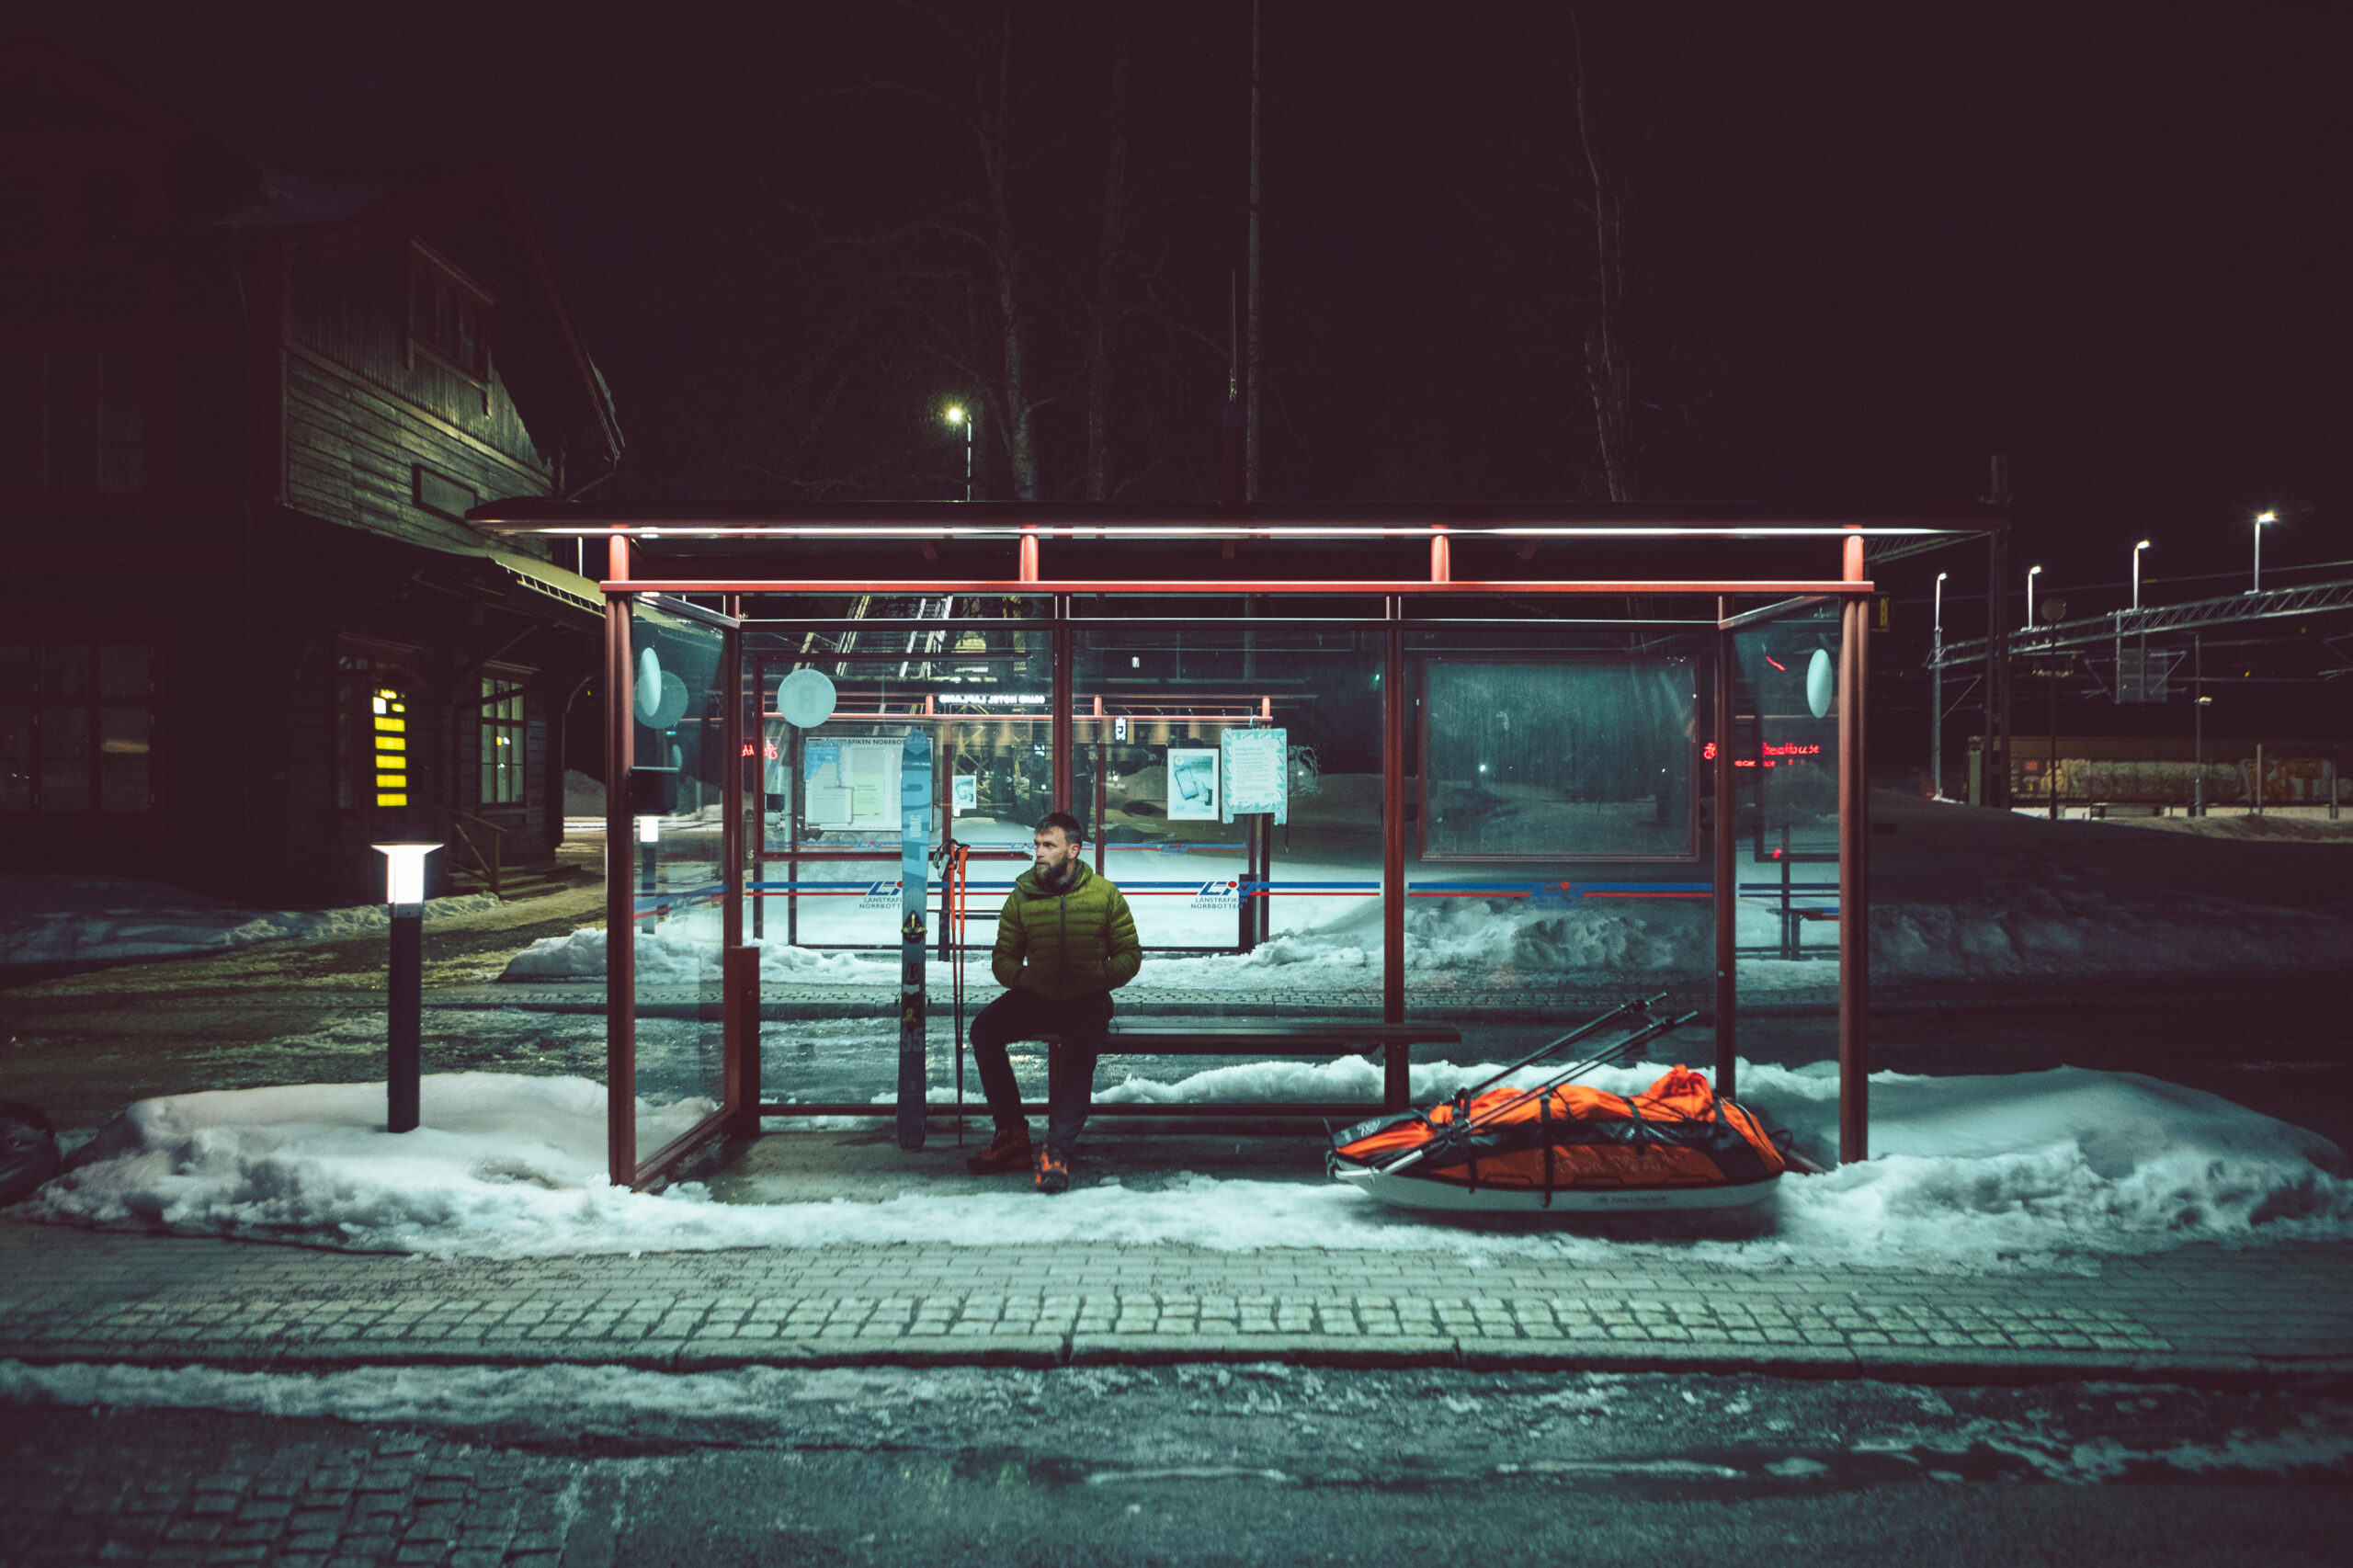 Getting from Kiruna to Sarek was a logistical challenge. Here, we are waiting for a bus that never arrived. Shot on the SIGMA 24-70mm f2.8 DG HSM | Art © Ewan Harvey